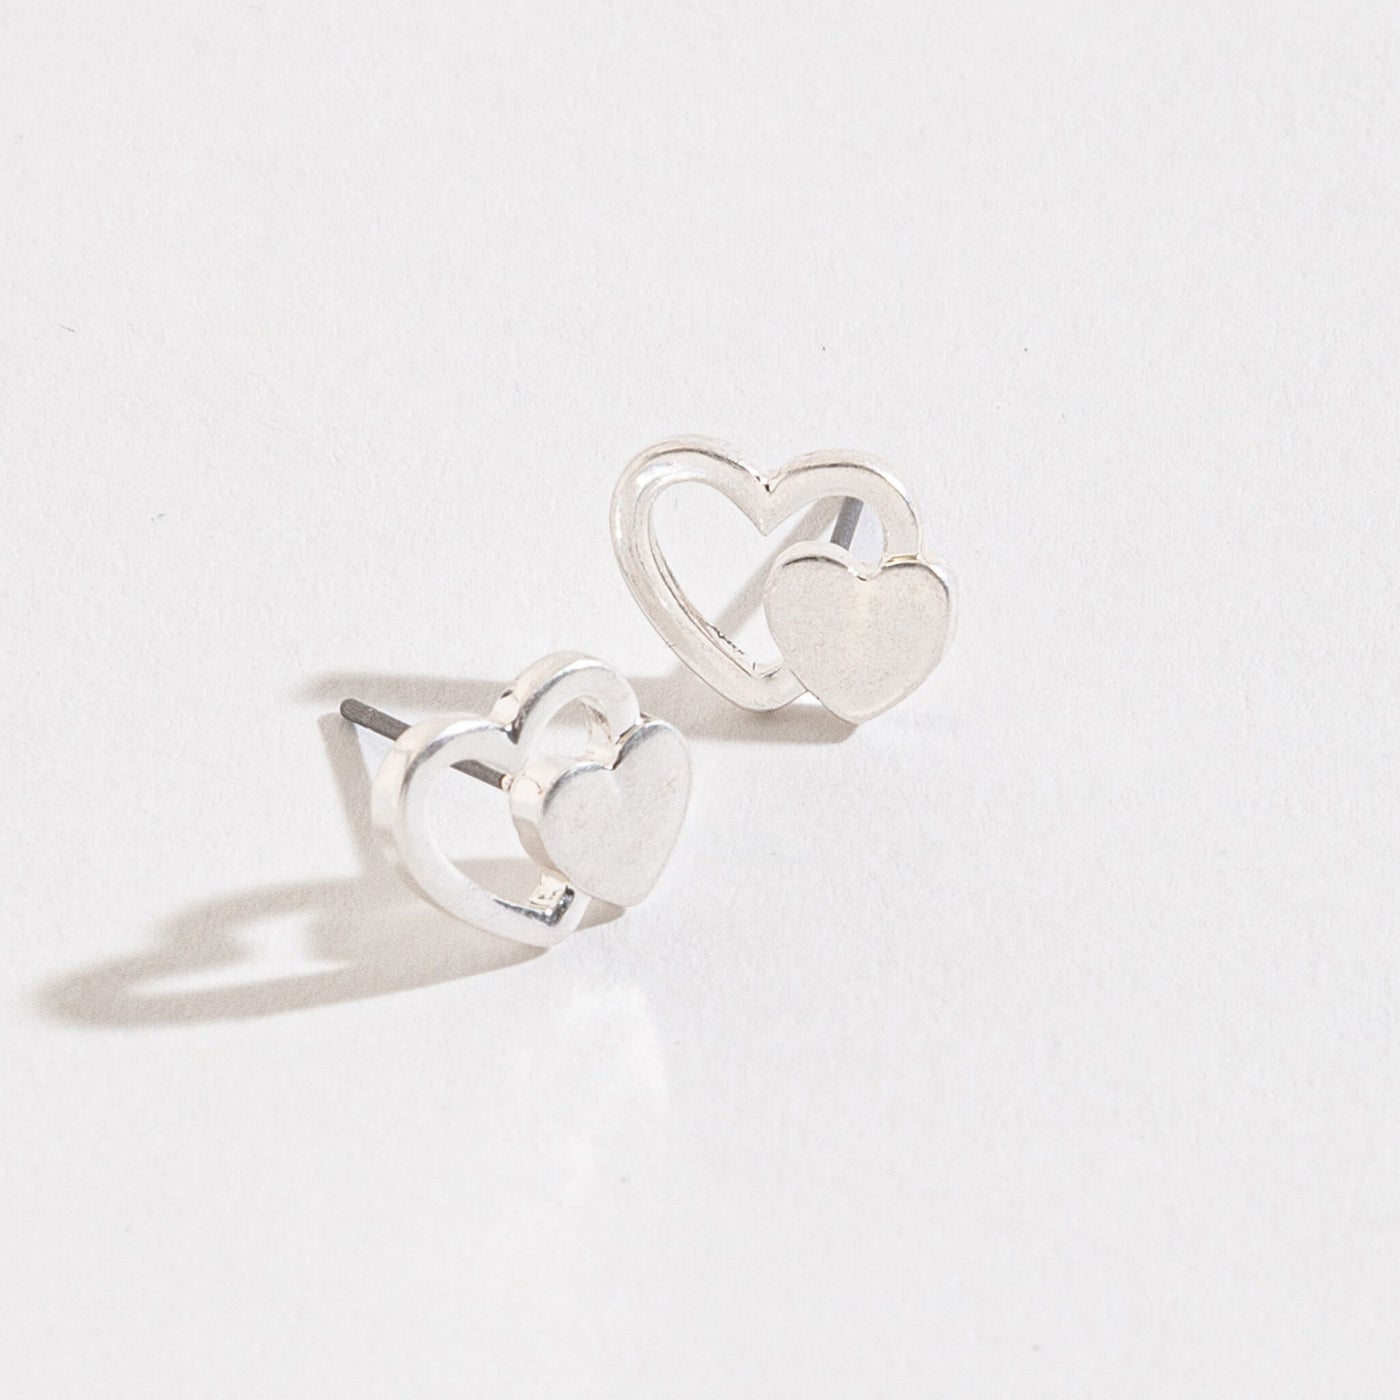 silver double heart stud earrings on a white background